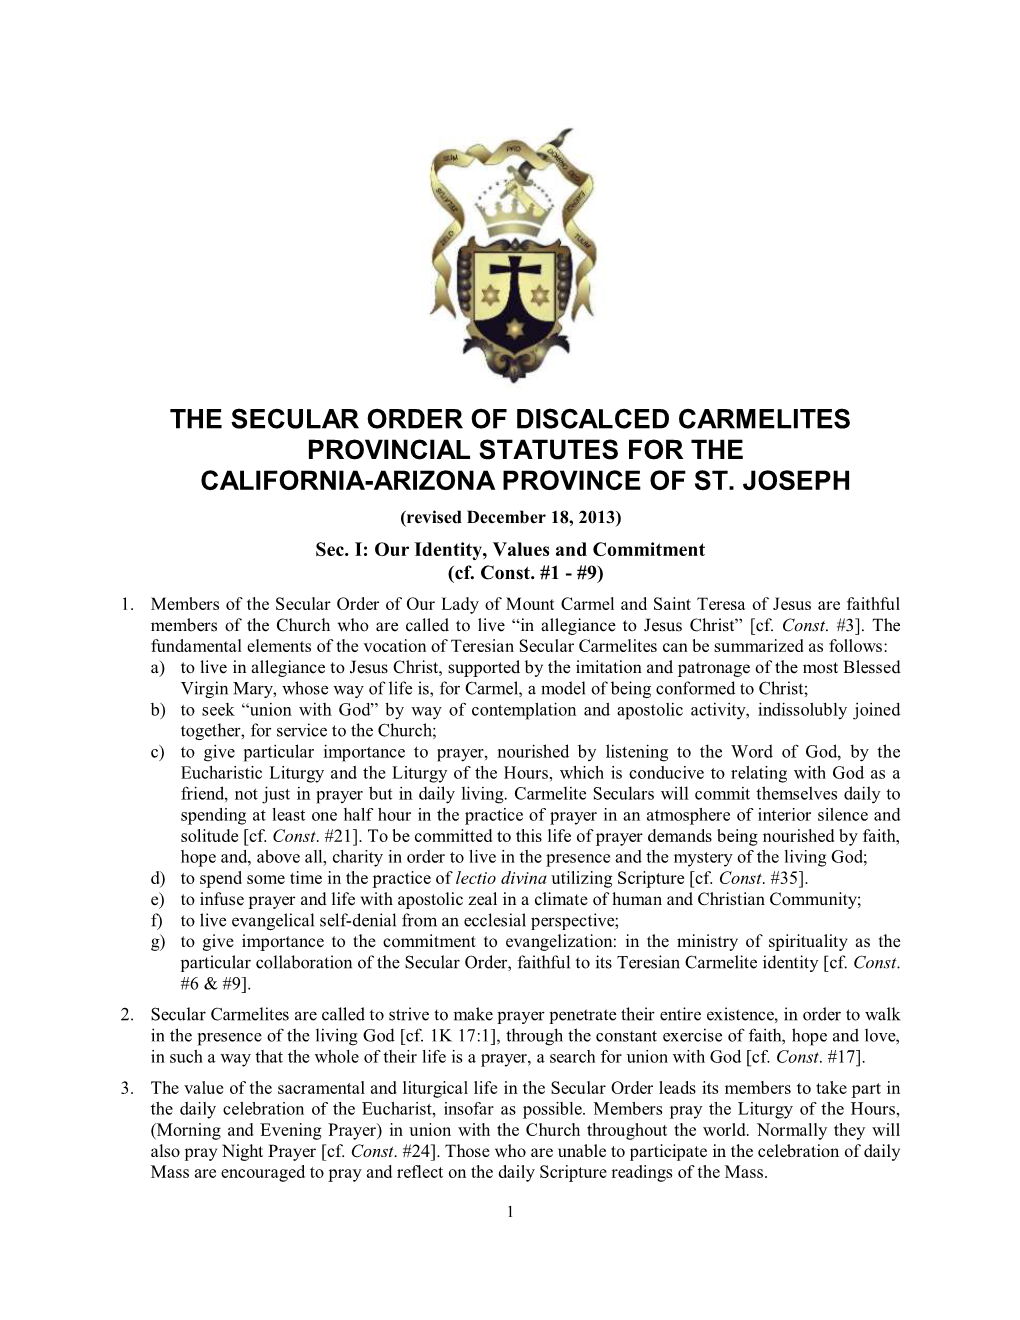 The Secular Order of Discalced Carmelites Provincial Statutes for the California-Arizona Province of St